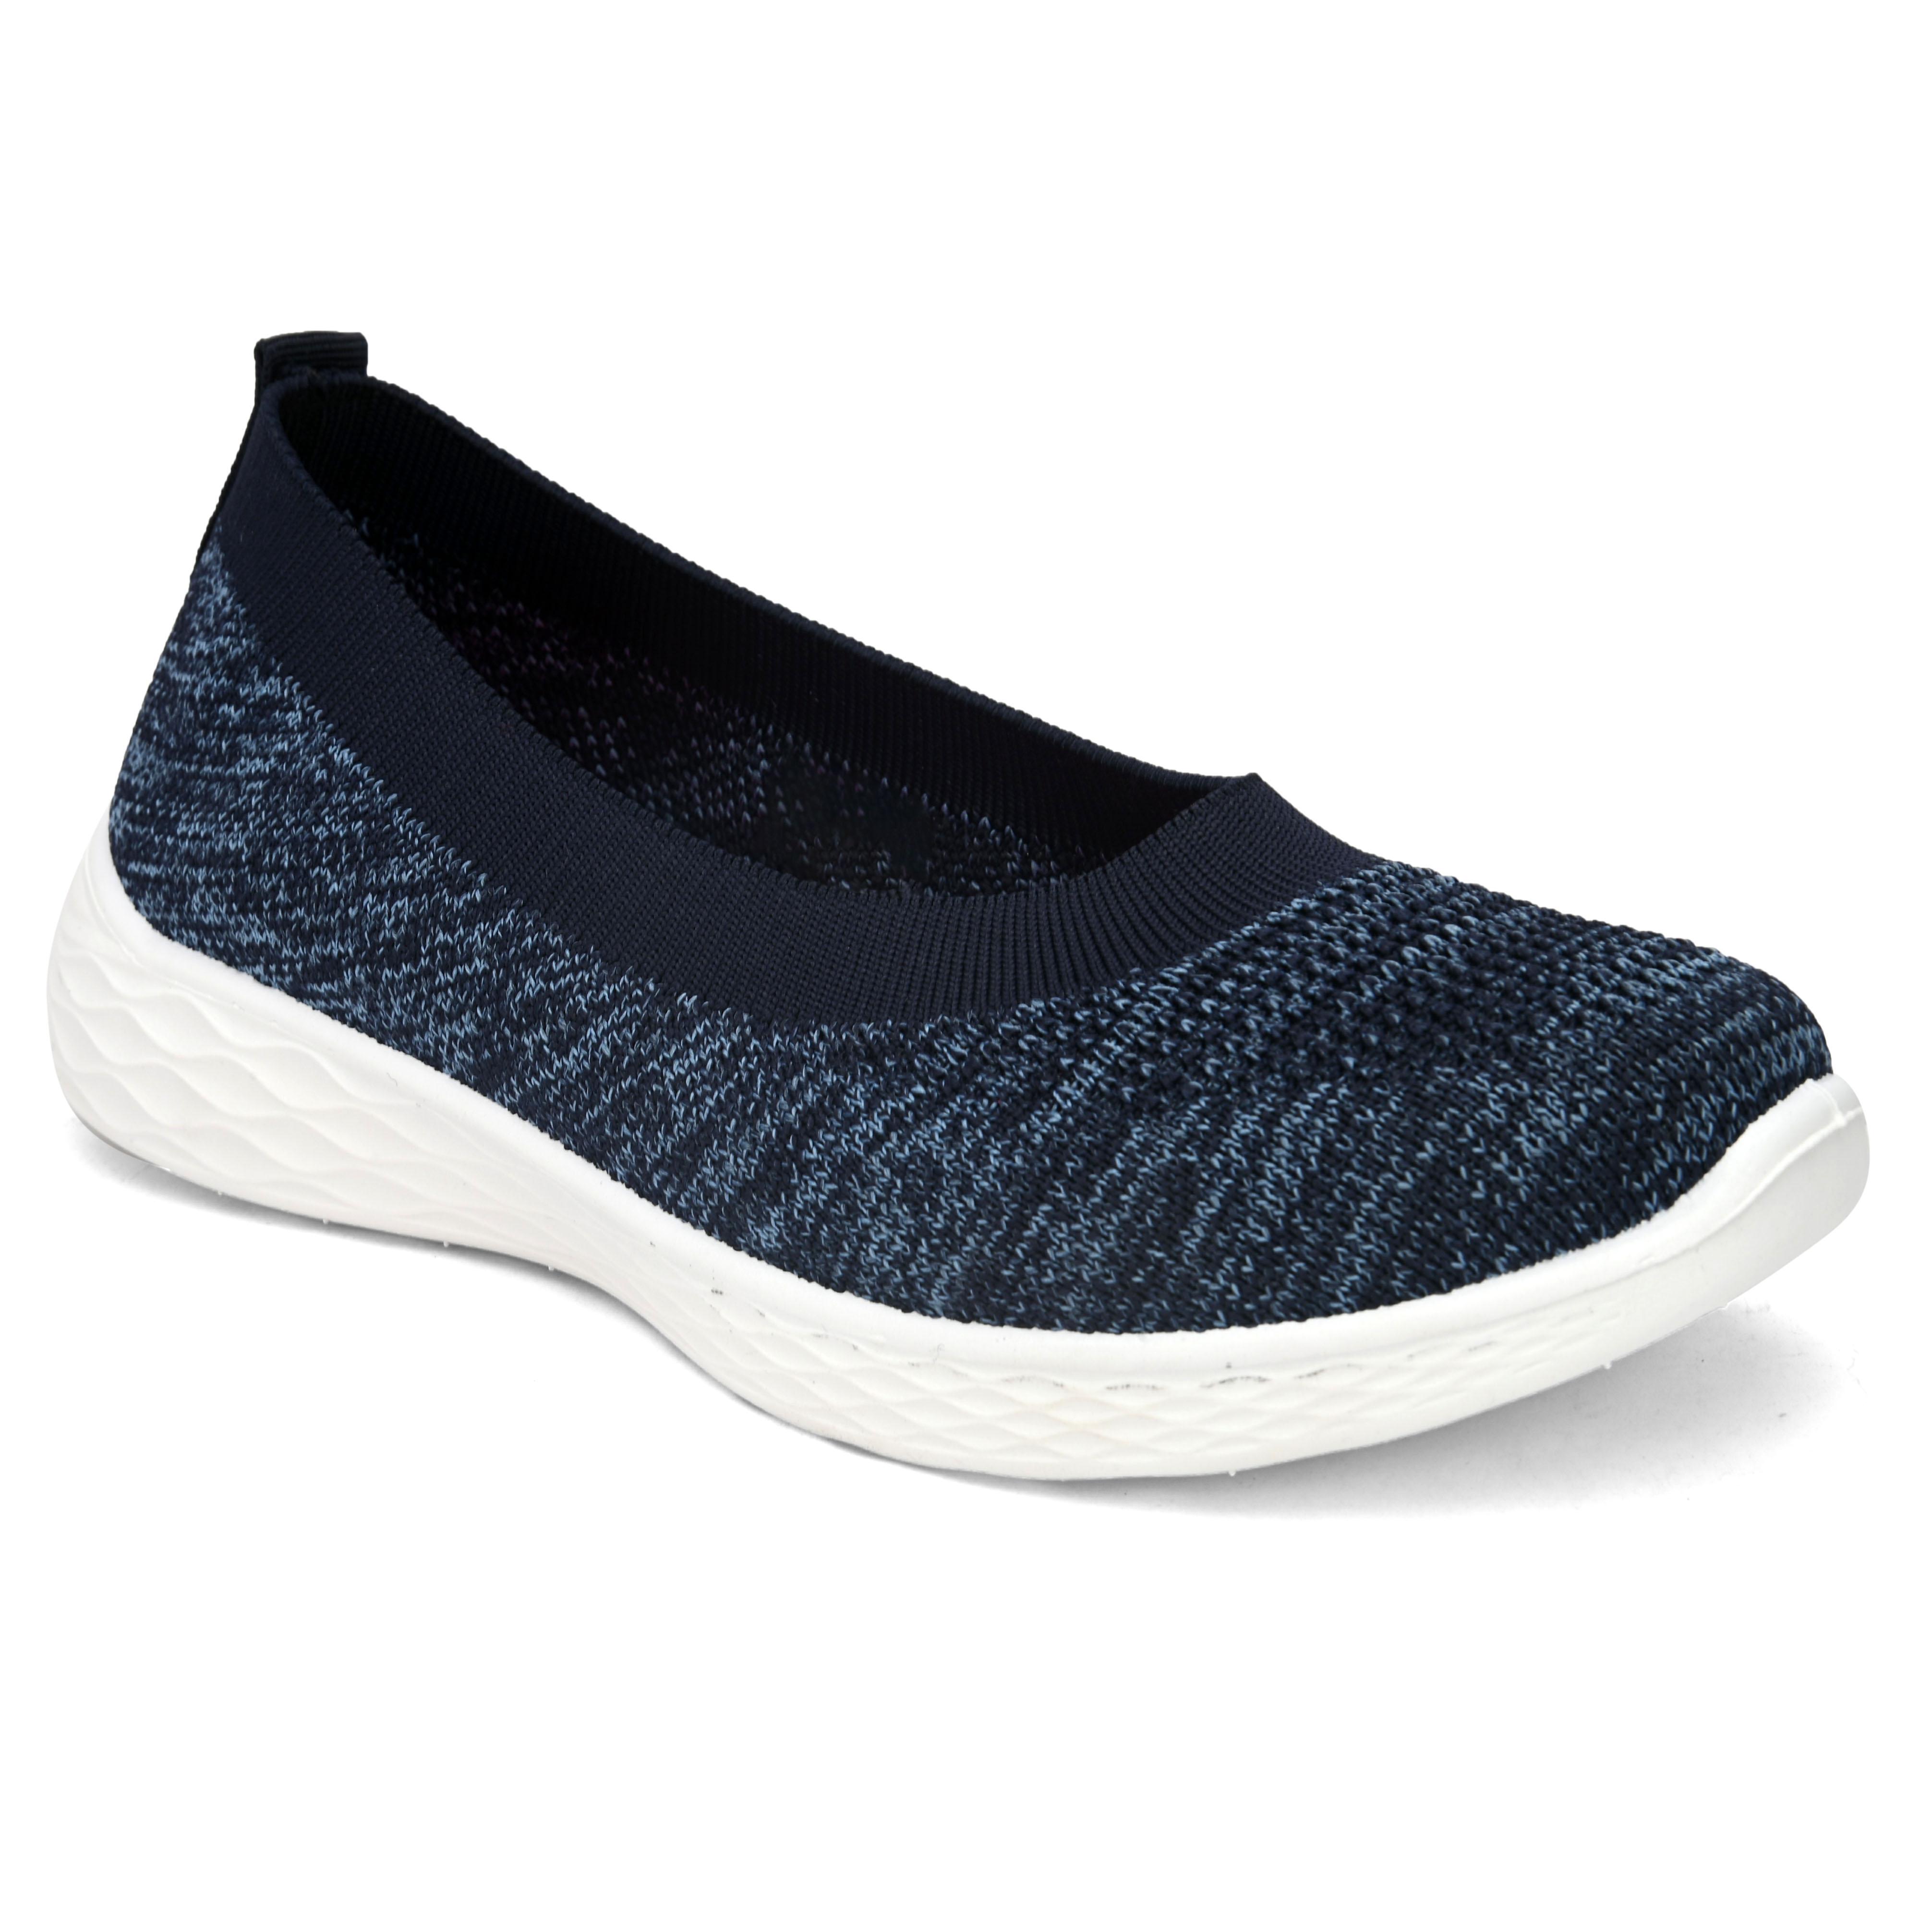 Briskers Casual Bellies for Women (Blue)